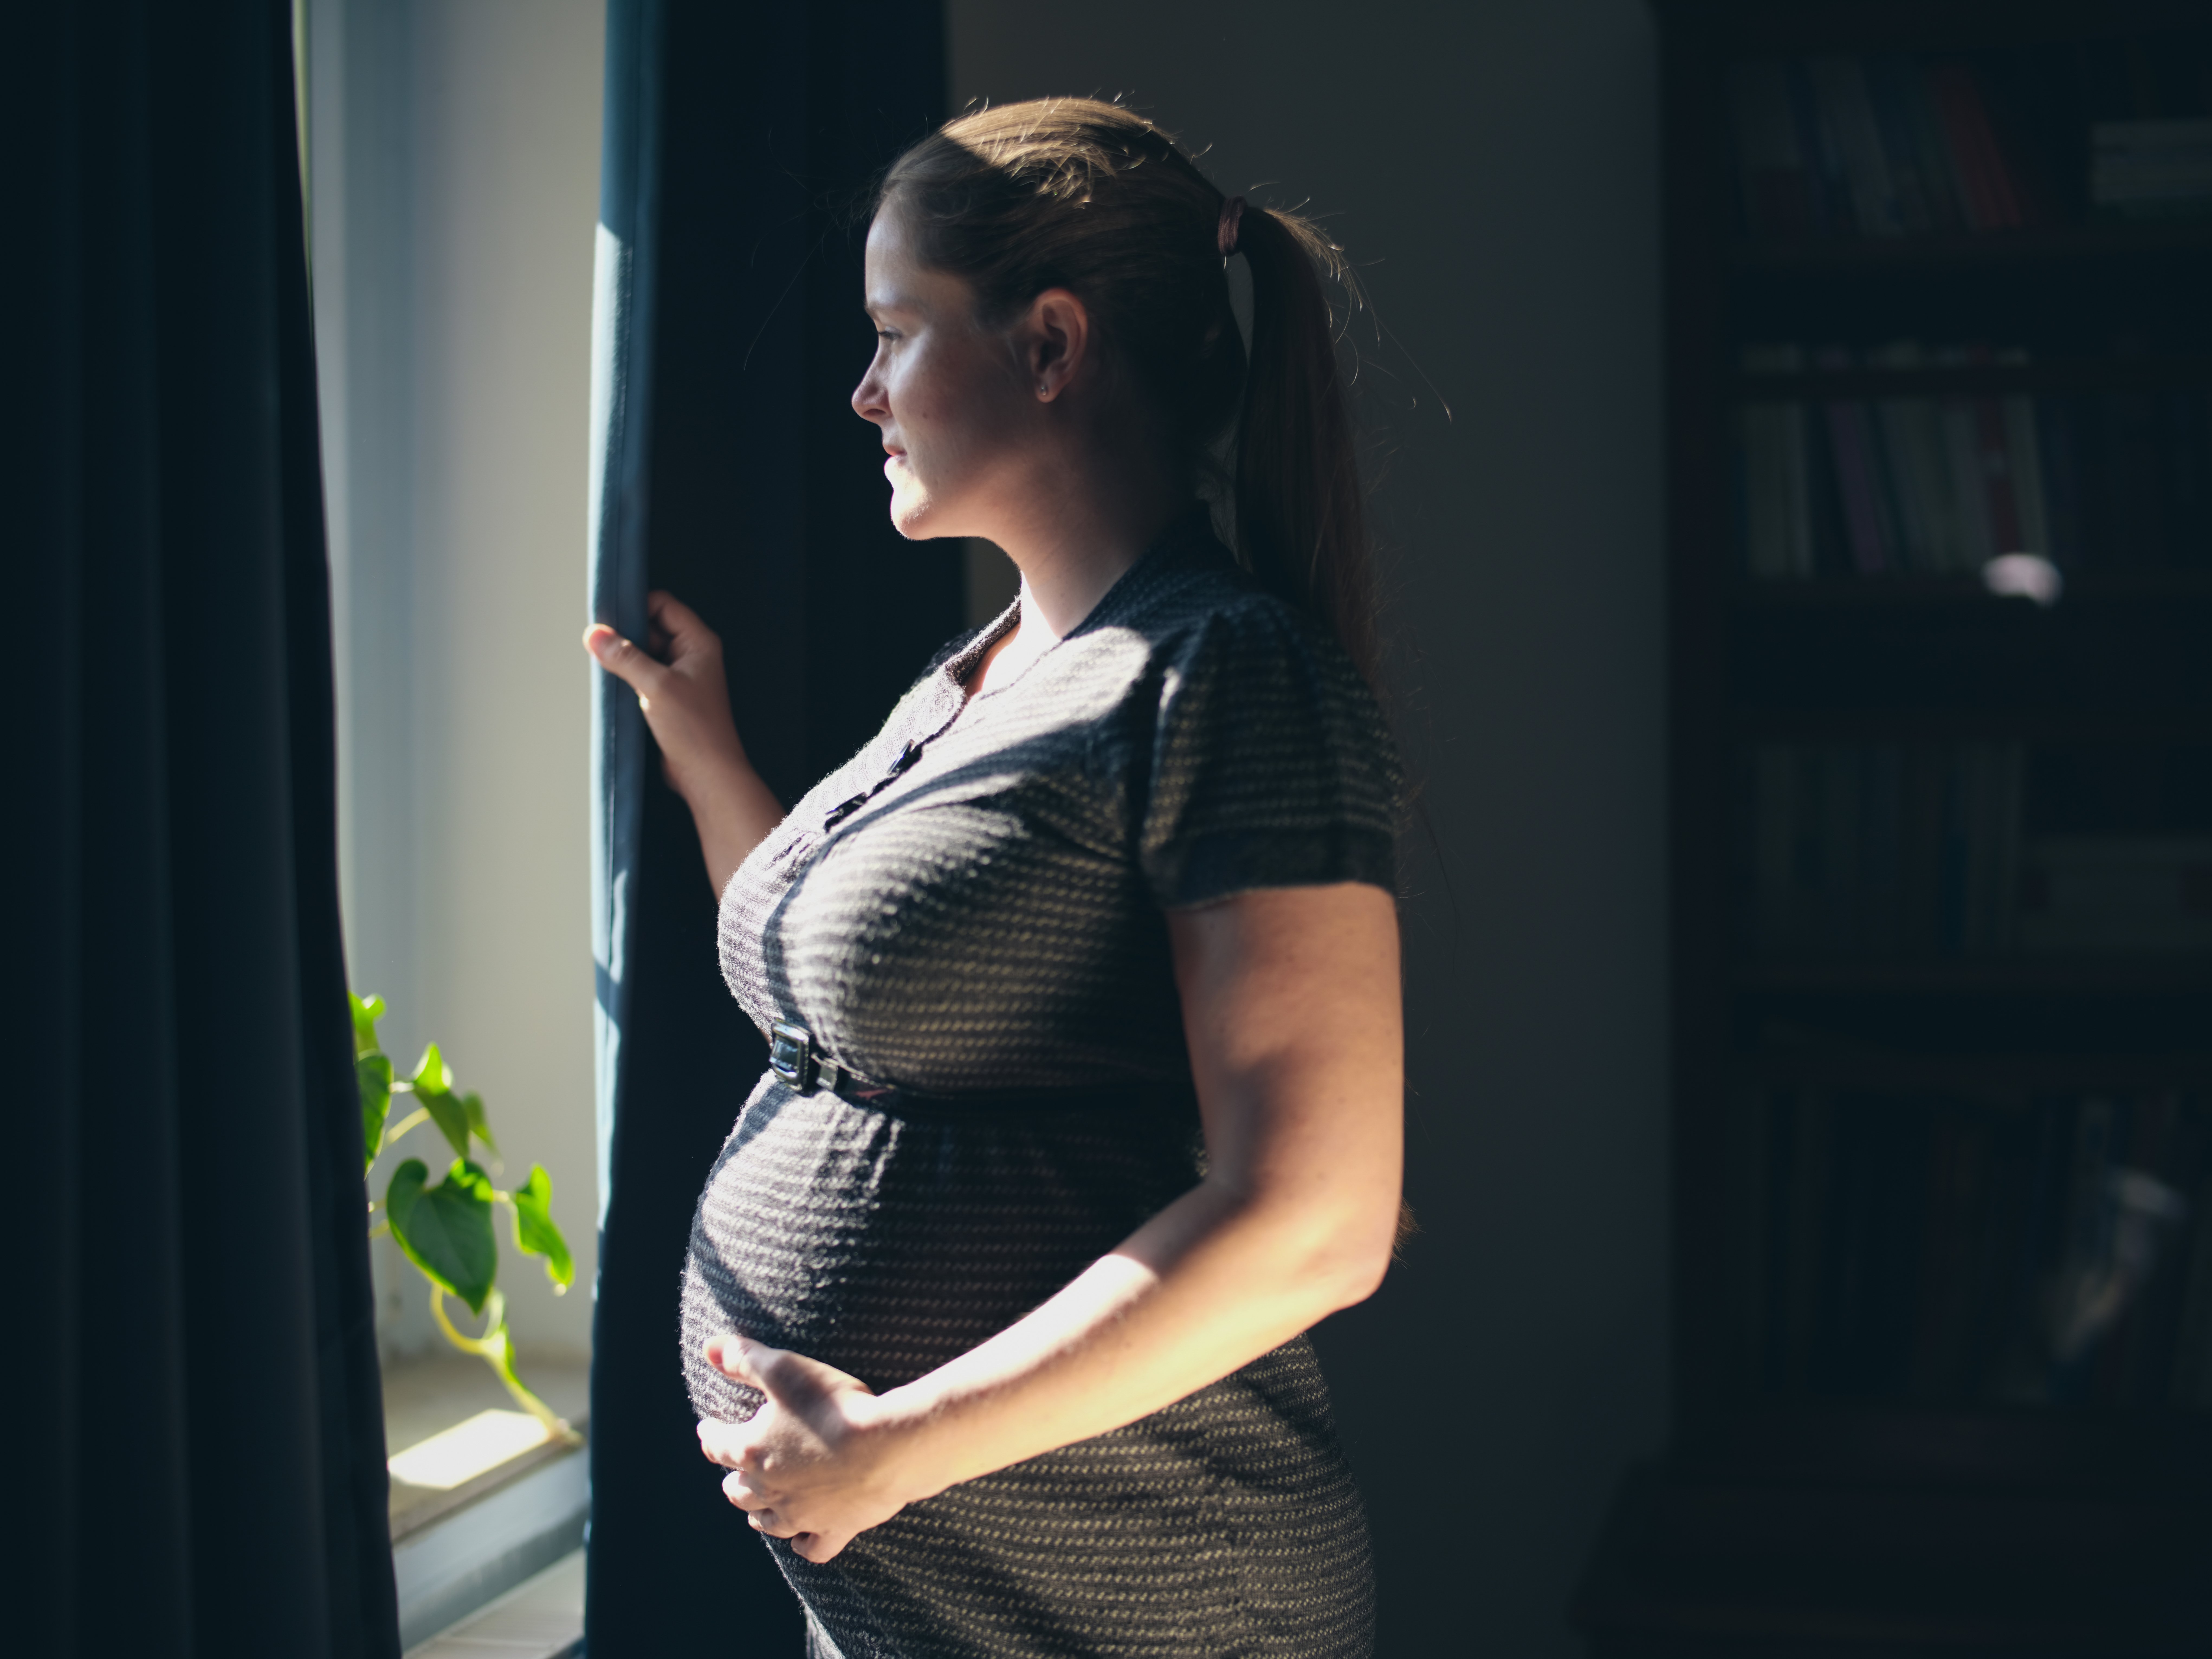 A pregnant woman looks out a window | Source: Getty Images